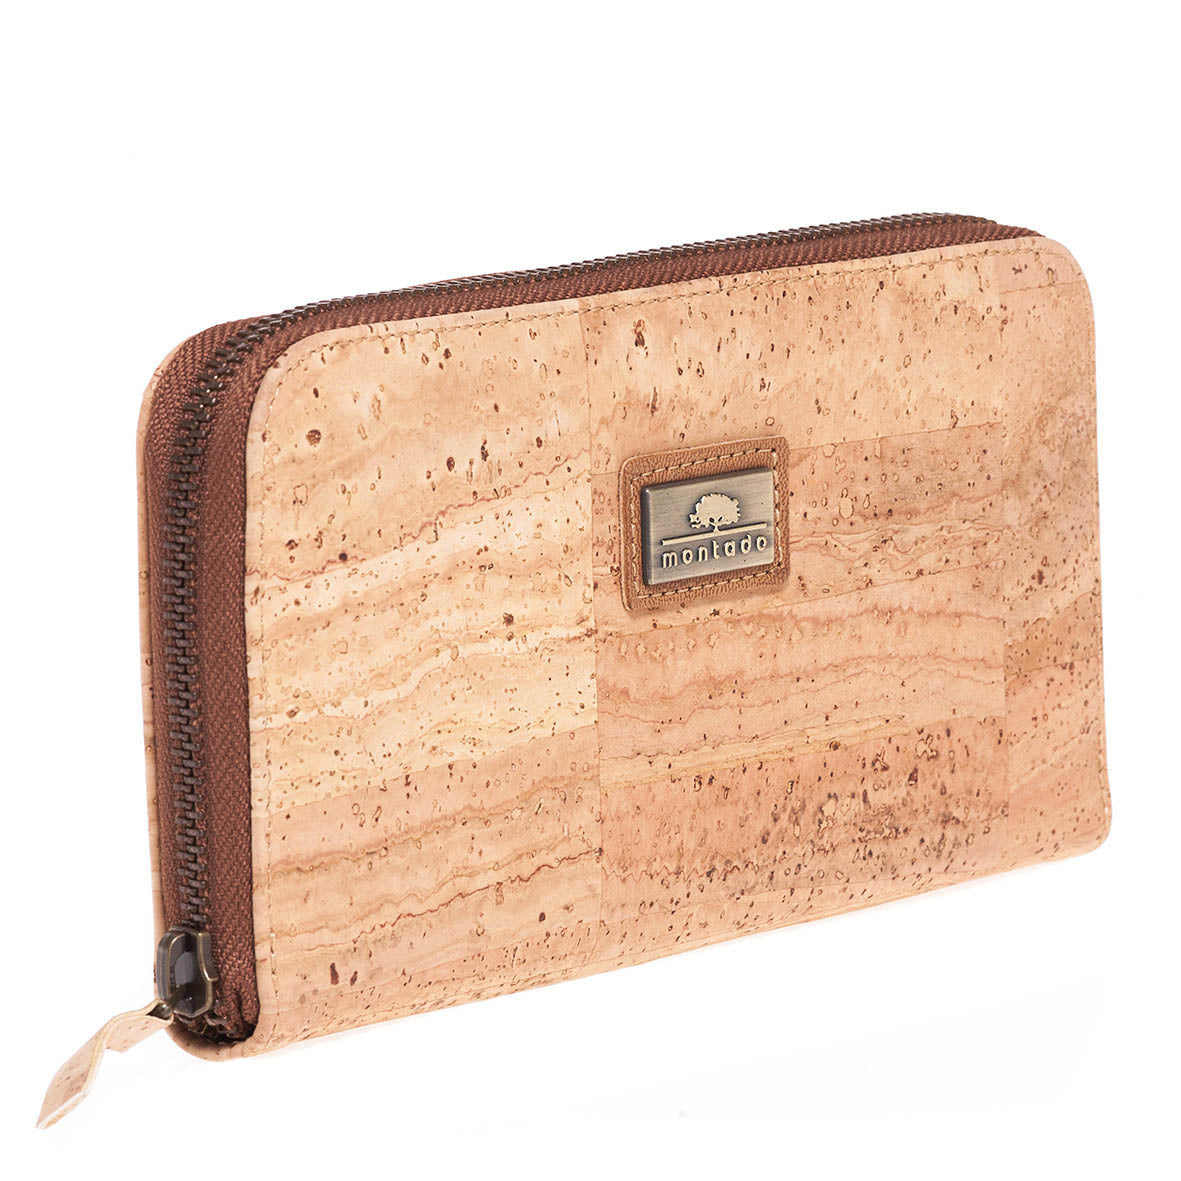 Ladies Cork Wallet with all around zipper with montado label made in Portugal